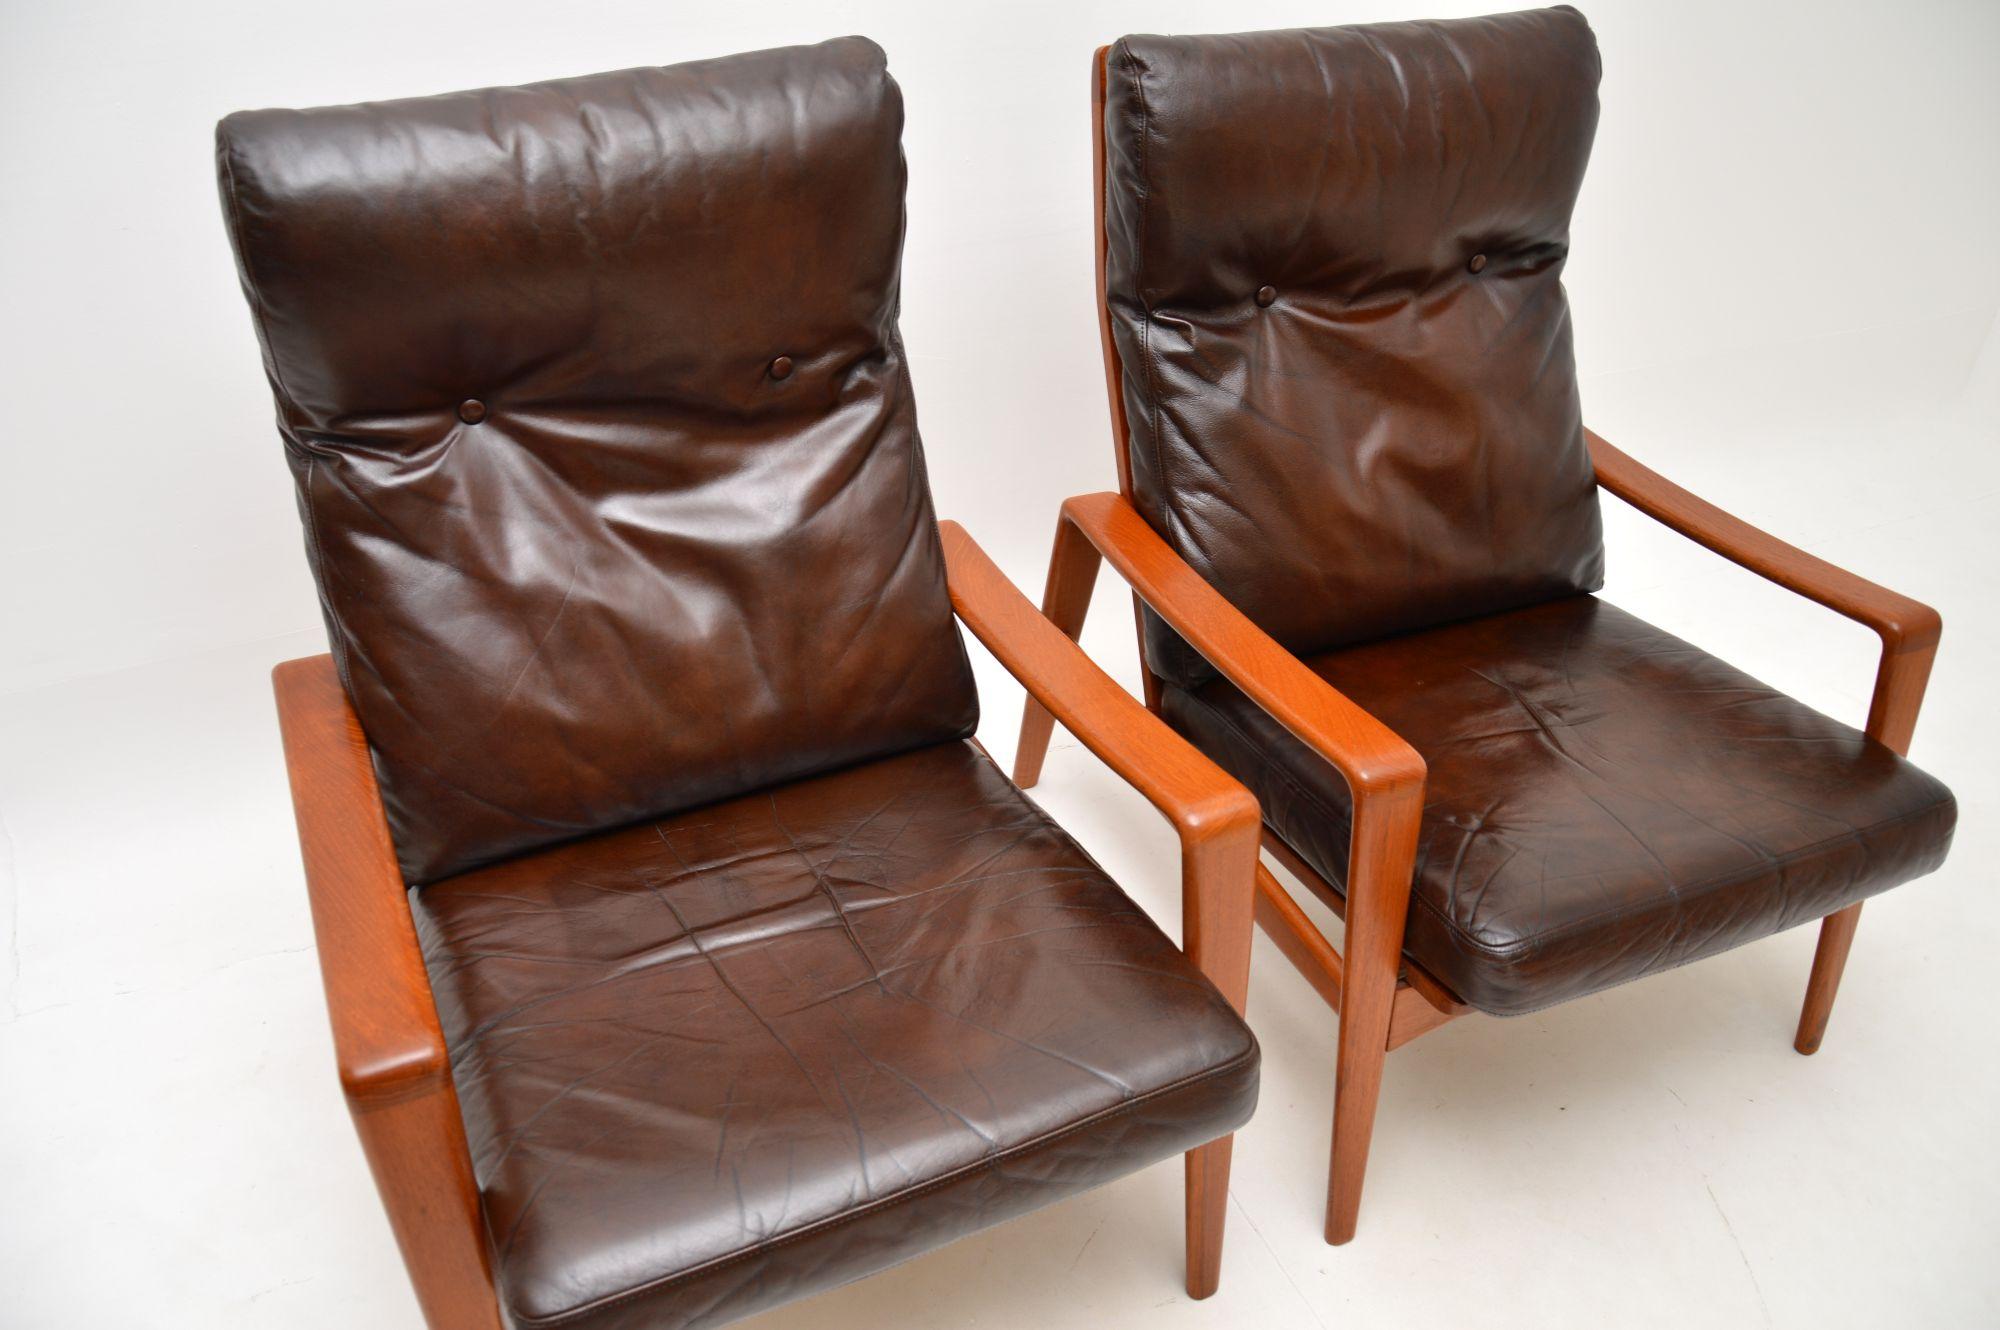 Mid-20th Century Pair of Danish Vintage Teak and Leather Armchairs by Arne Wahl Iversen For Sale